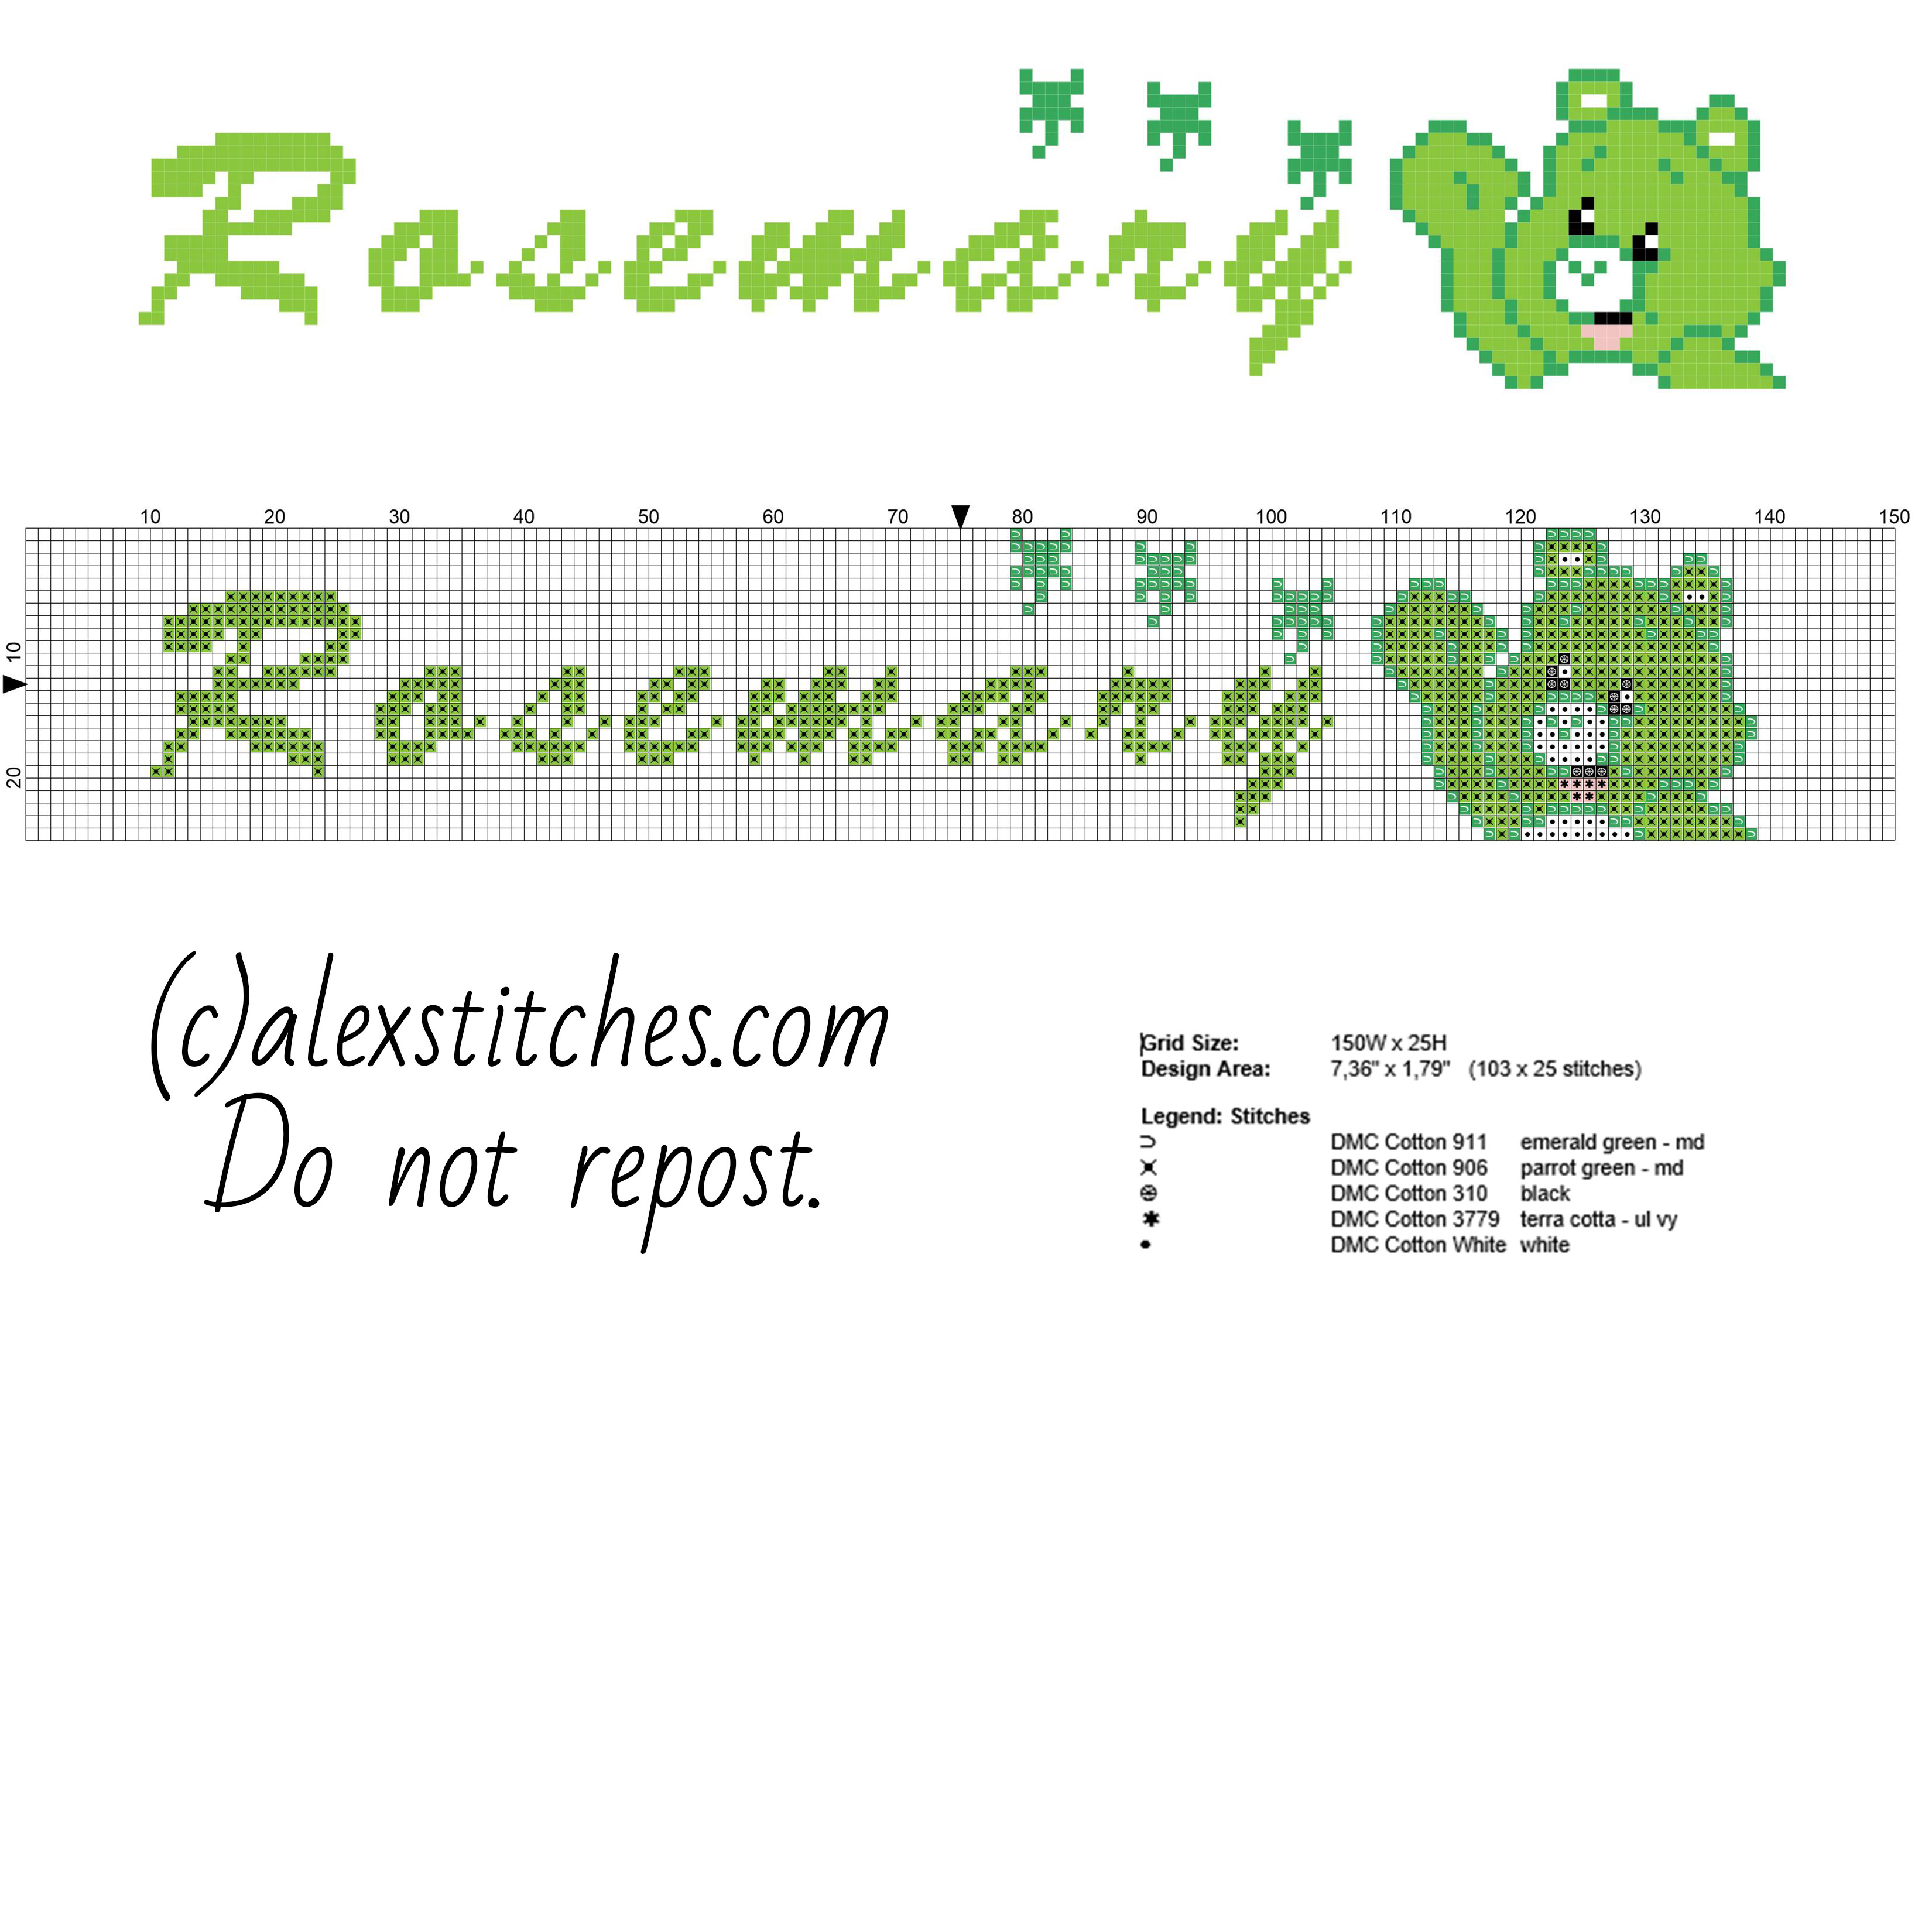 Rosemary female baby name with Good Luck Bear free cross stitch pattern download